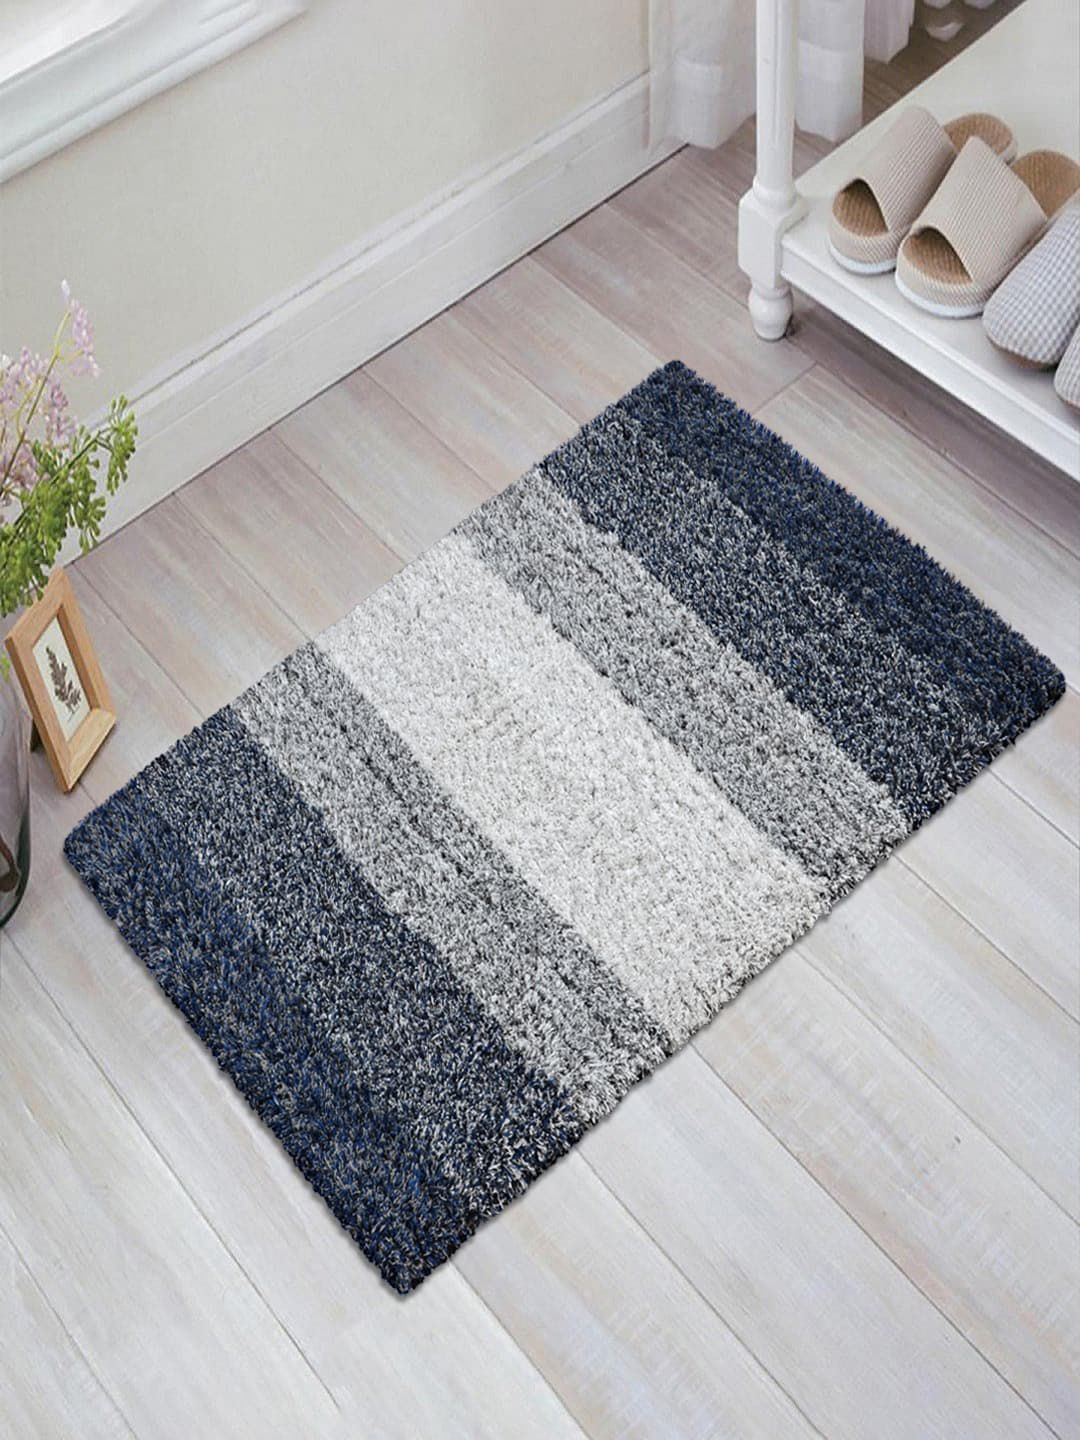 Saral Home Unisex Grey & Blue Cotton Shaggy Floor Mat Price in India